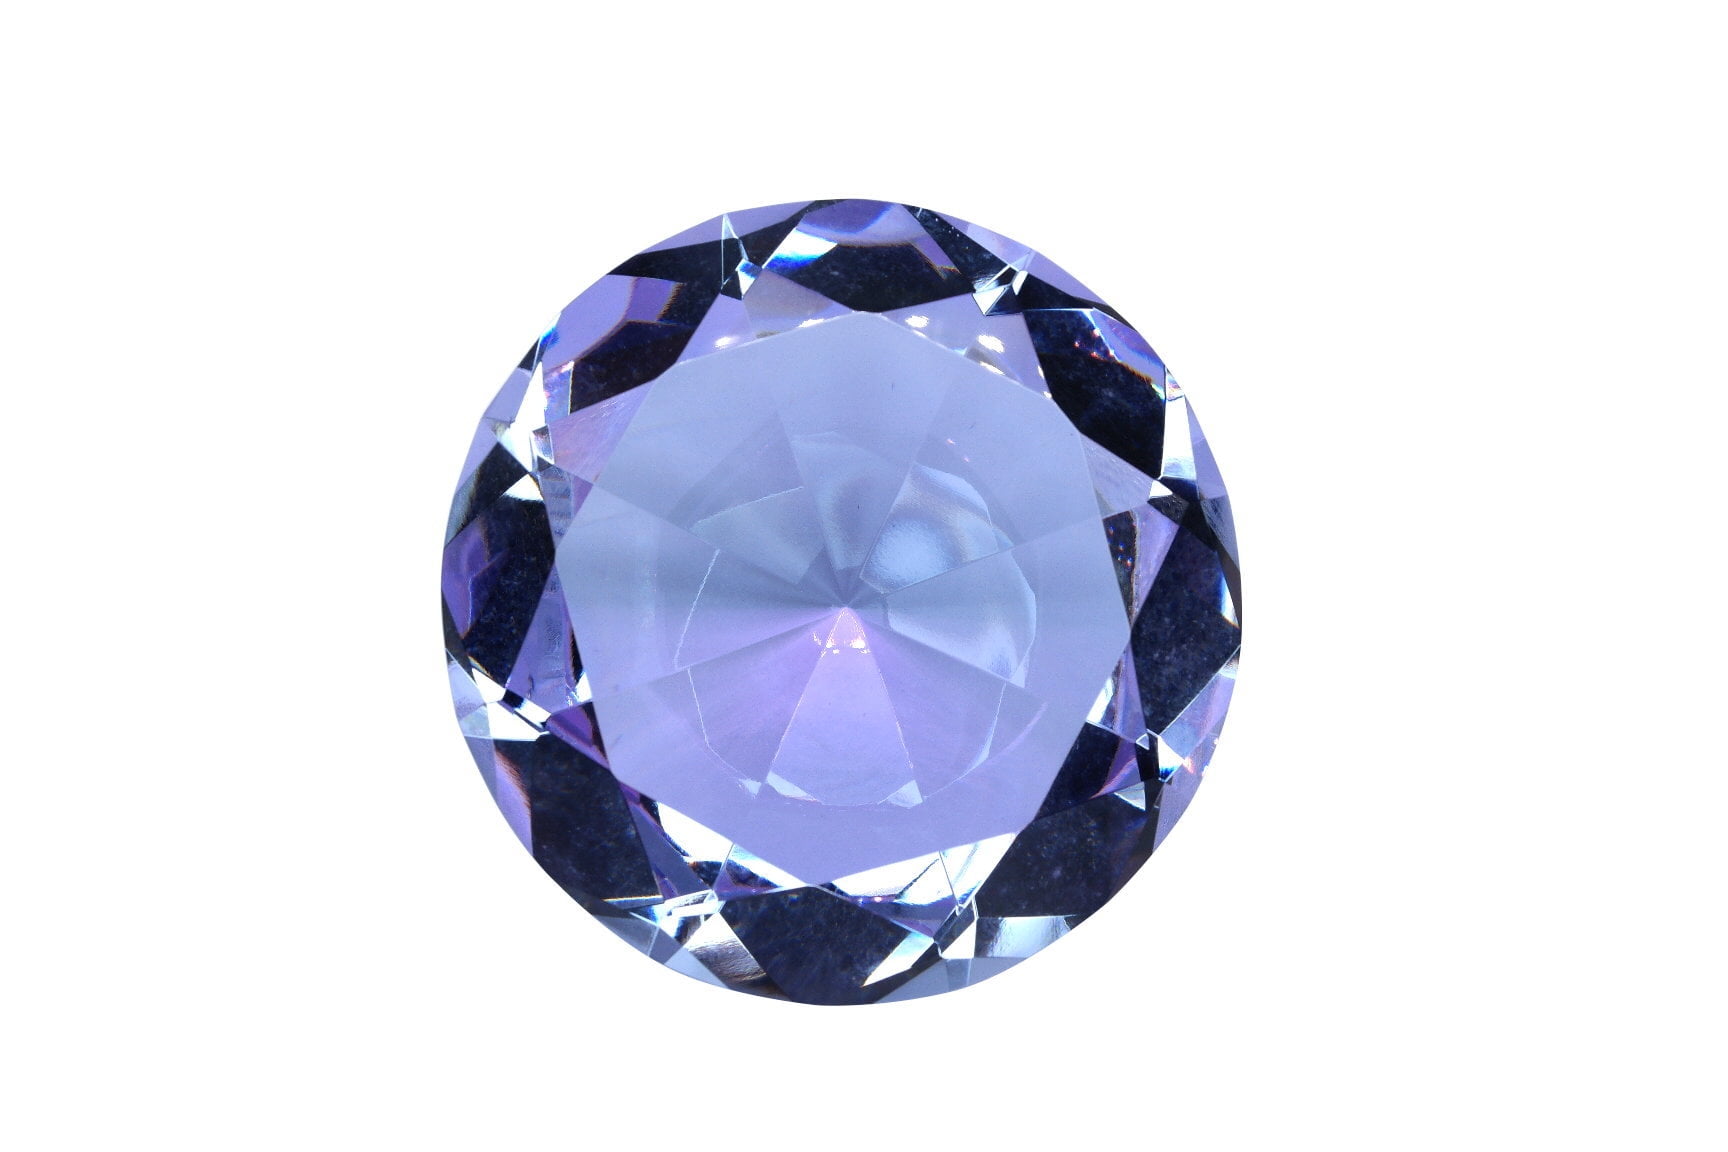 04 Diamond Shaped 80 mm Diameter Crystal Jewel Paperweight by Tripact 